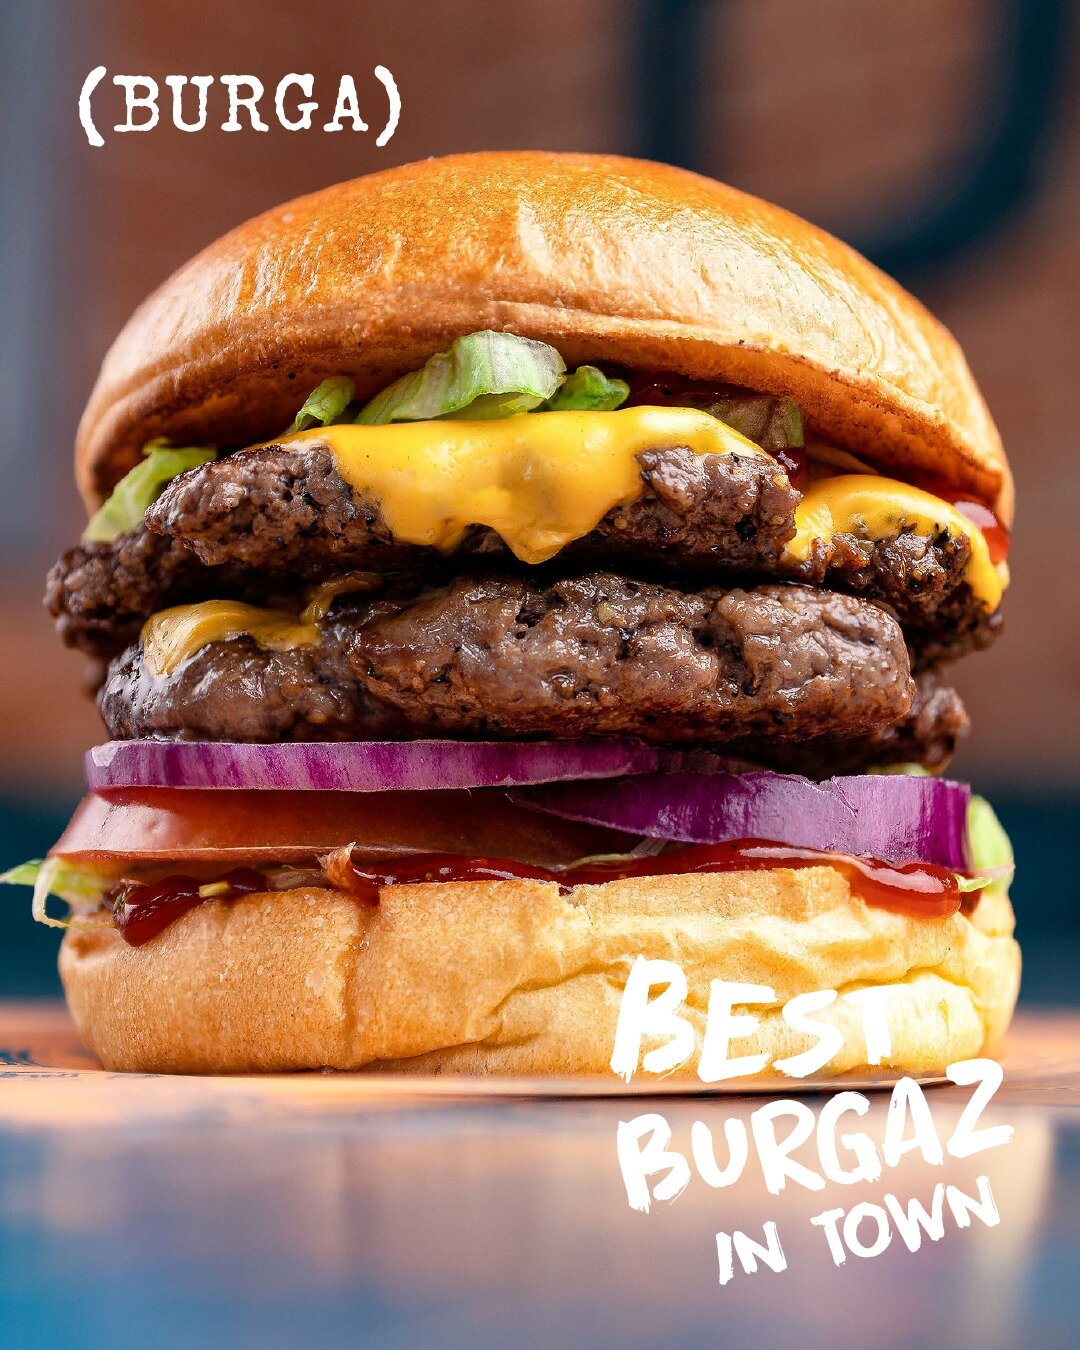 The Classic Cheese Burgaz🍔 We always recommend you start with the classic, then work your way through the our menu! We also say, let the food do the talking! 

BEST BURGAZ IN TOWN 😍🍔 

📍Portsmouth
Willis Rd, PO1 1DQ 

📍Southampton
170 Portswood 